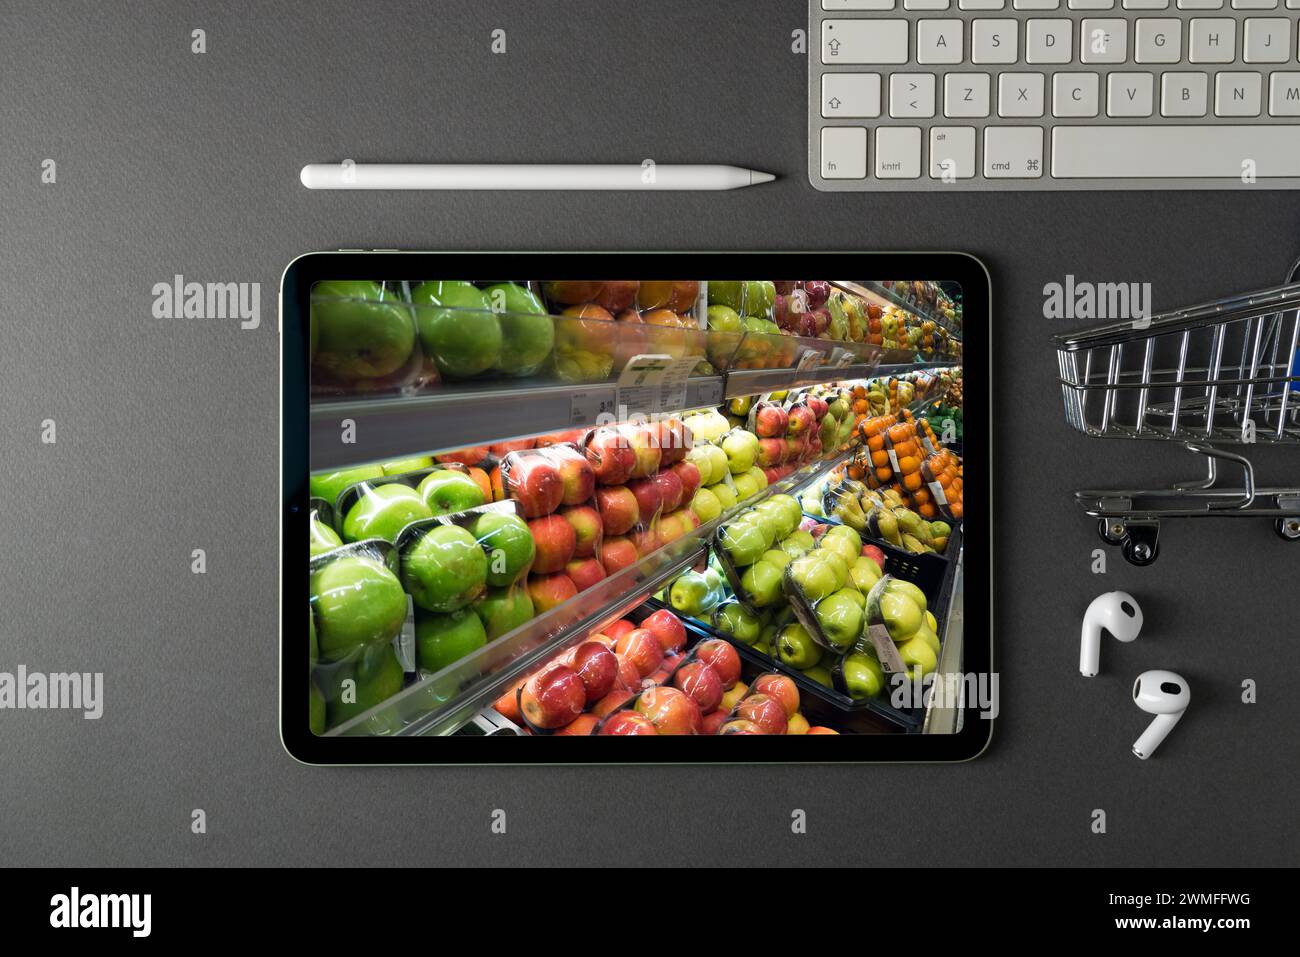 Tablet with grocery section on screen on dark gray office desk. There is a grocery cart and a keyboard next to him Stock Photo